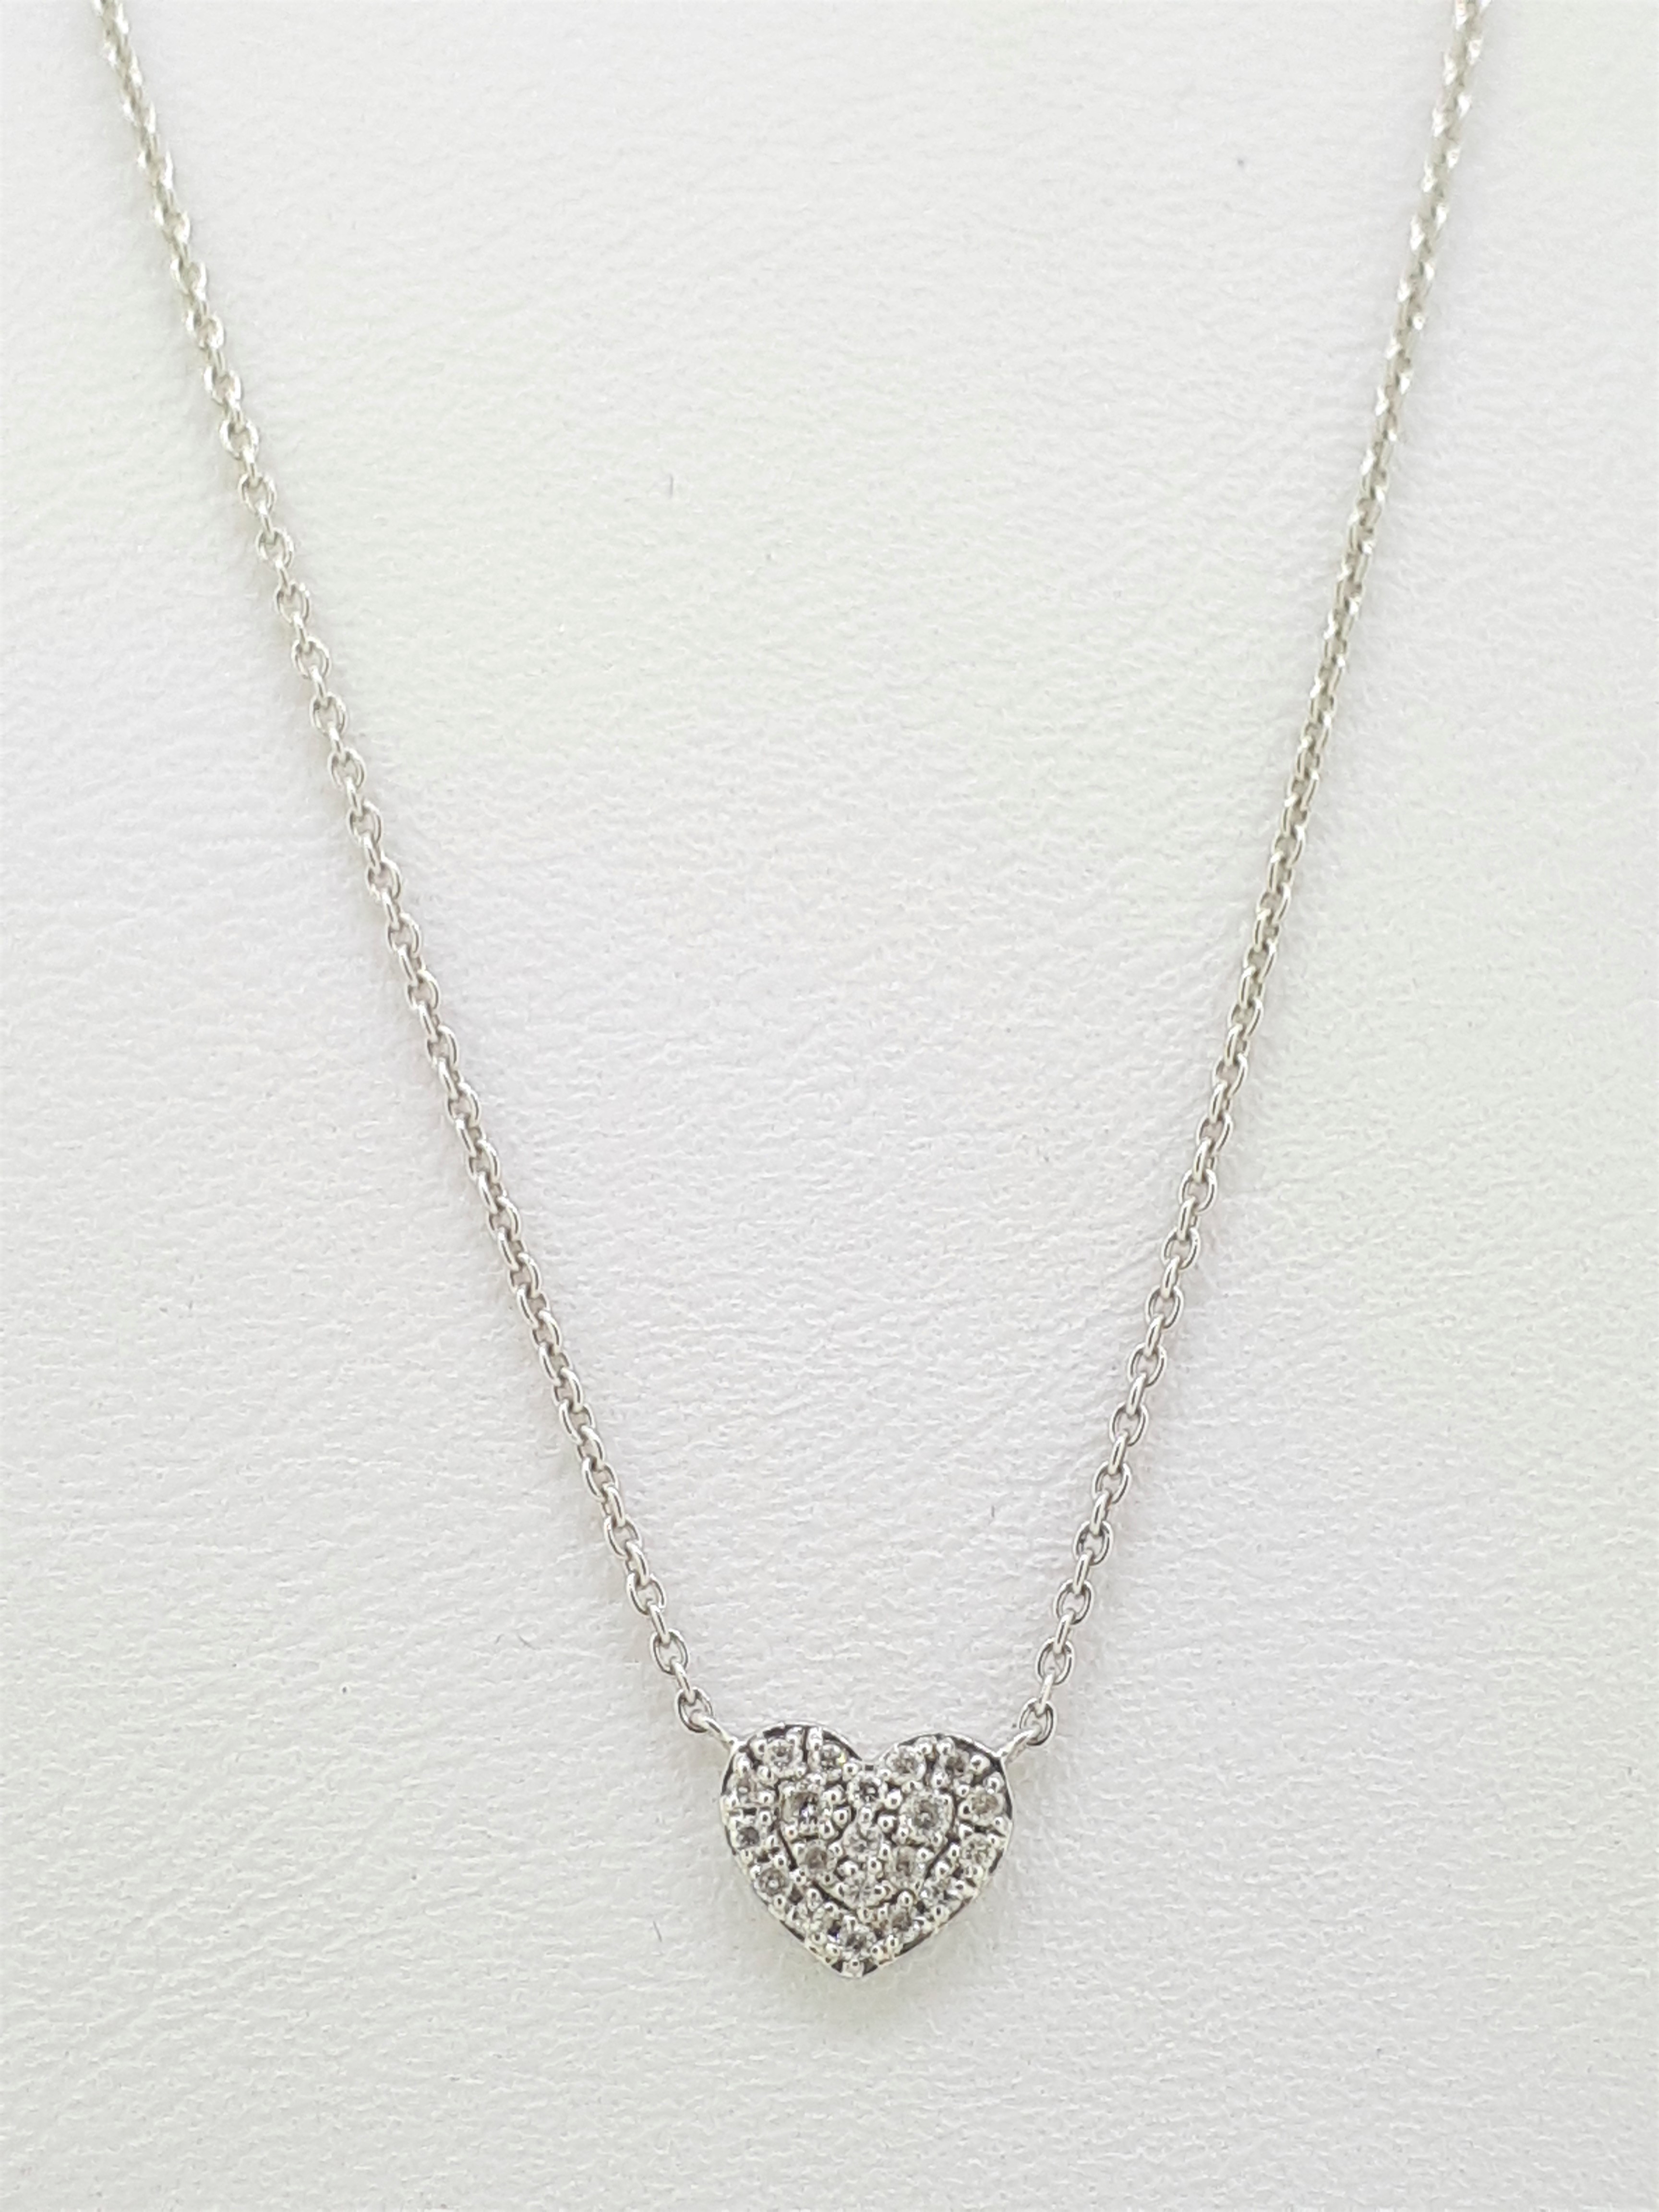 9ct White Gold 0.07ct Diamond Heart Pendant Necklace - Image 4 of 5